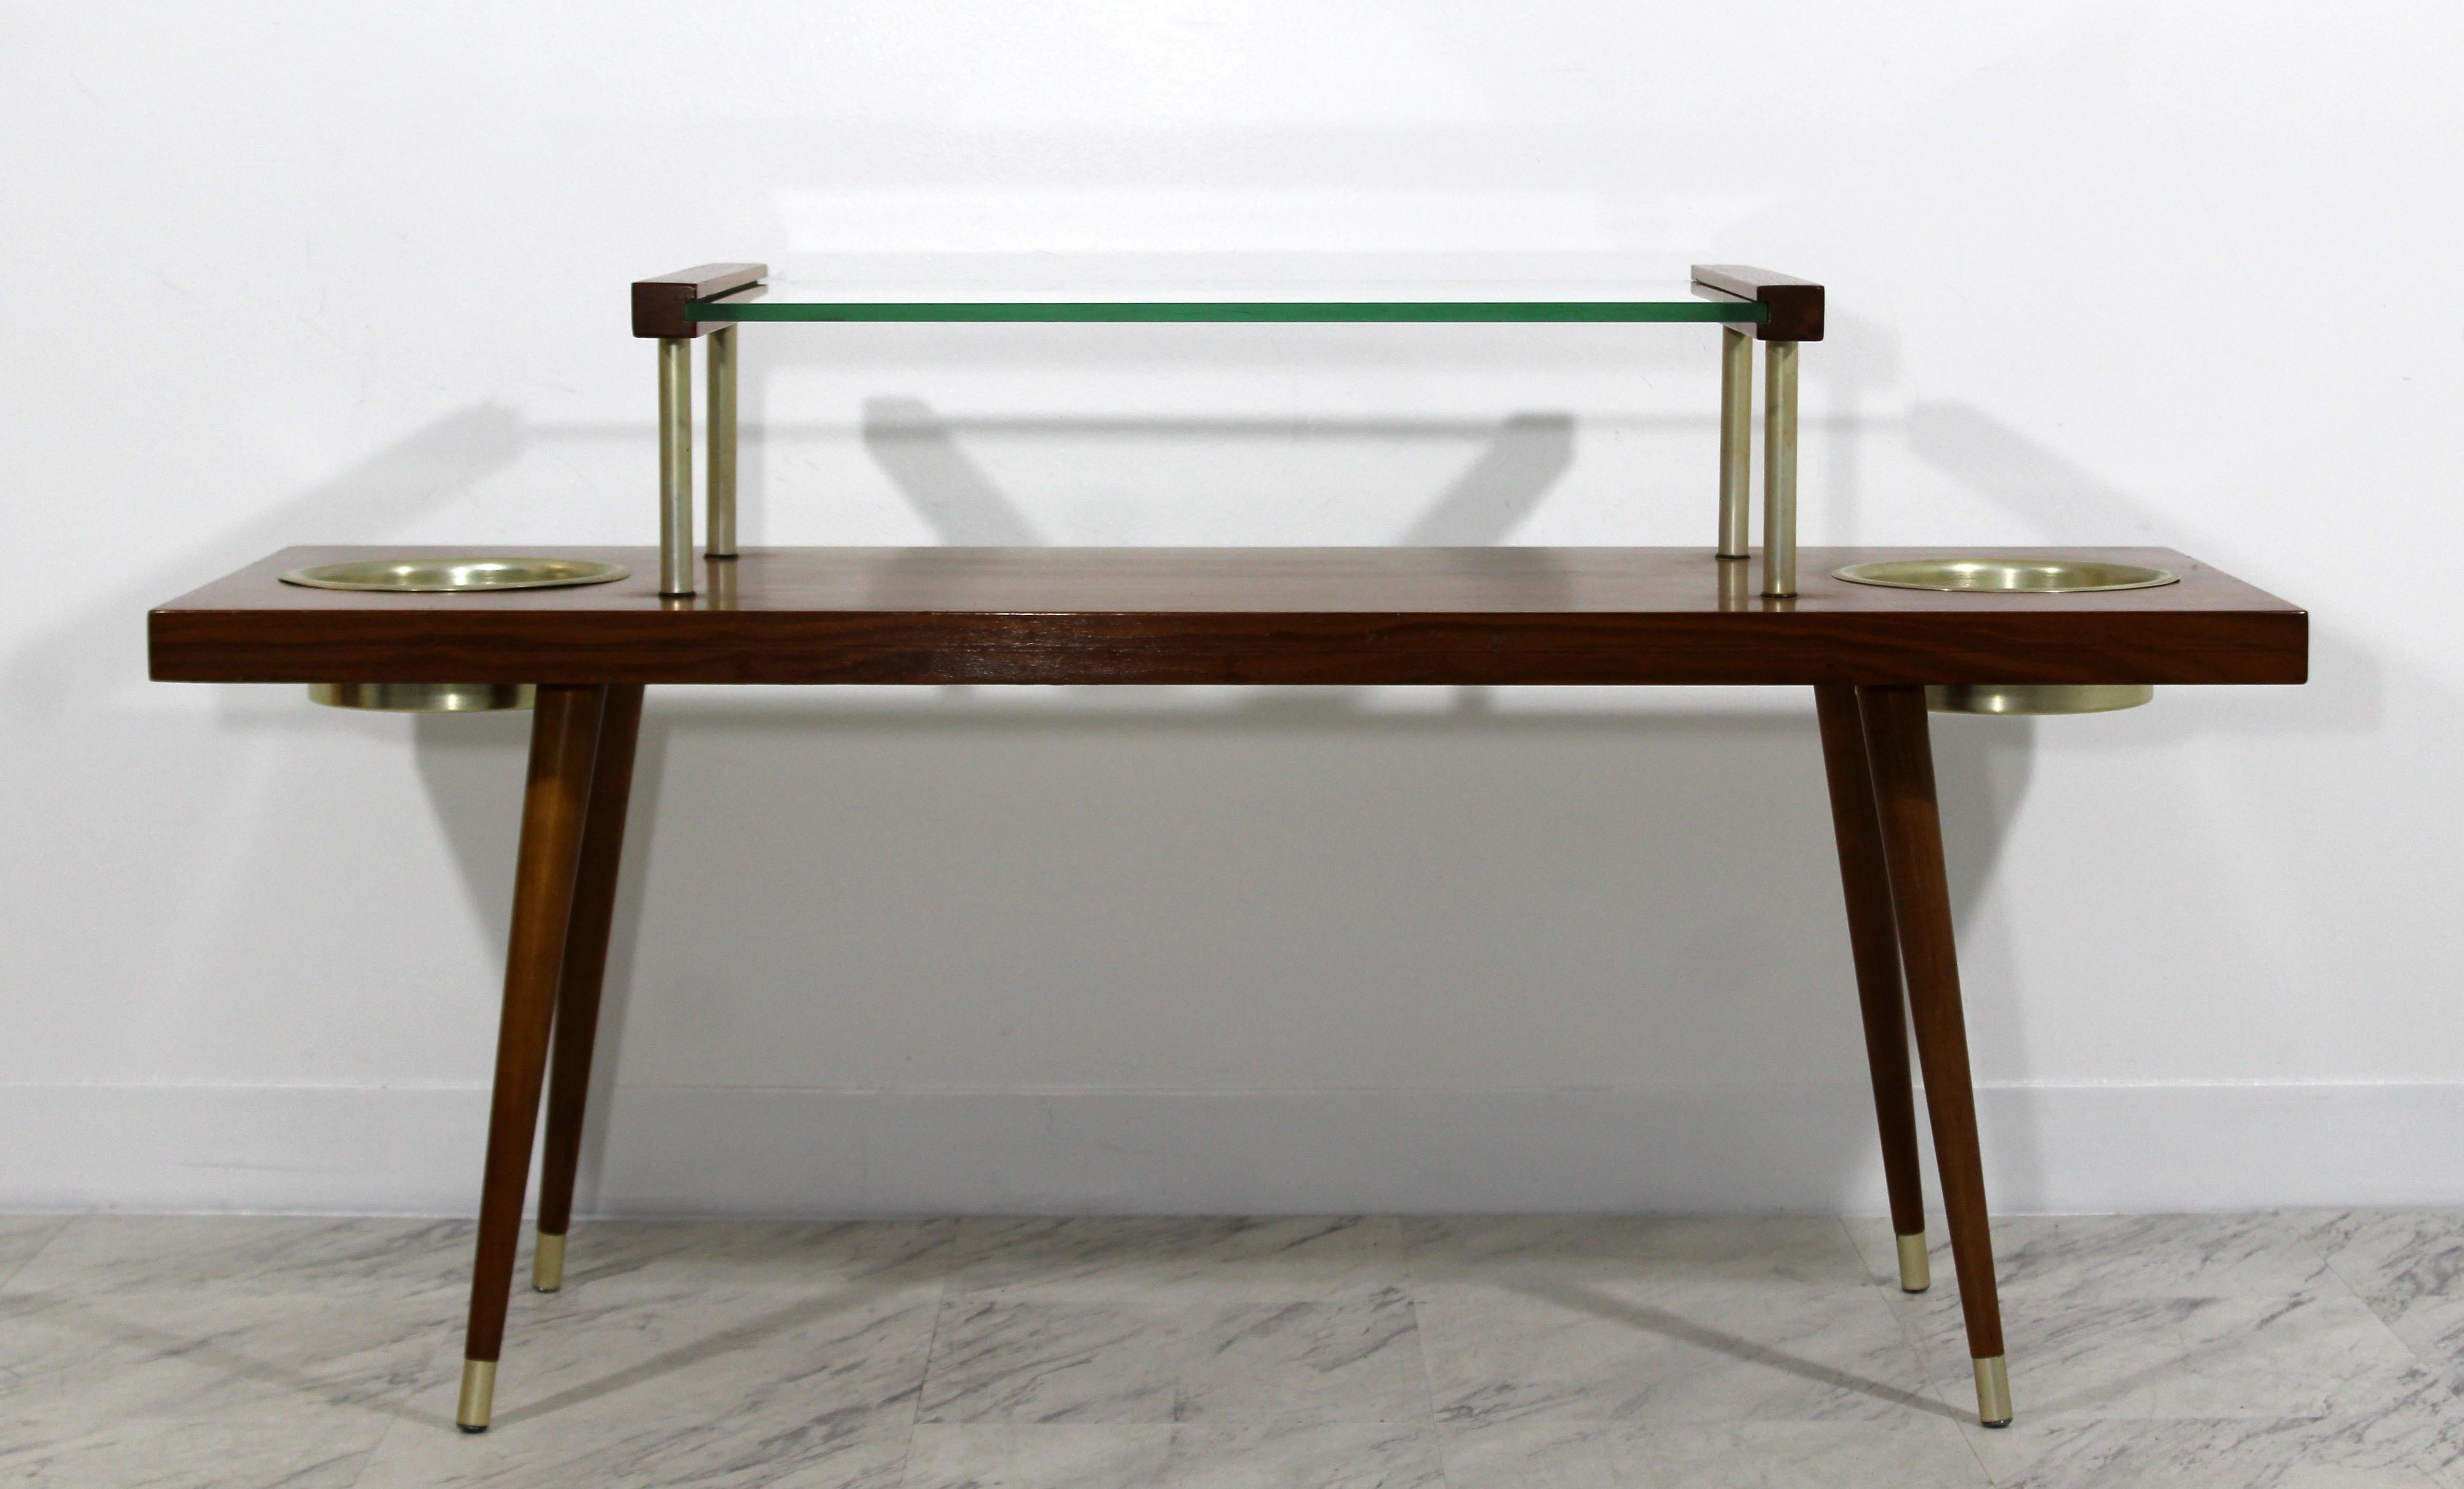 American Mid-Century Modern 2-Tier Walnut Glass with Planters Coffee Table McCobb, 1960s